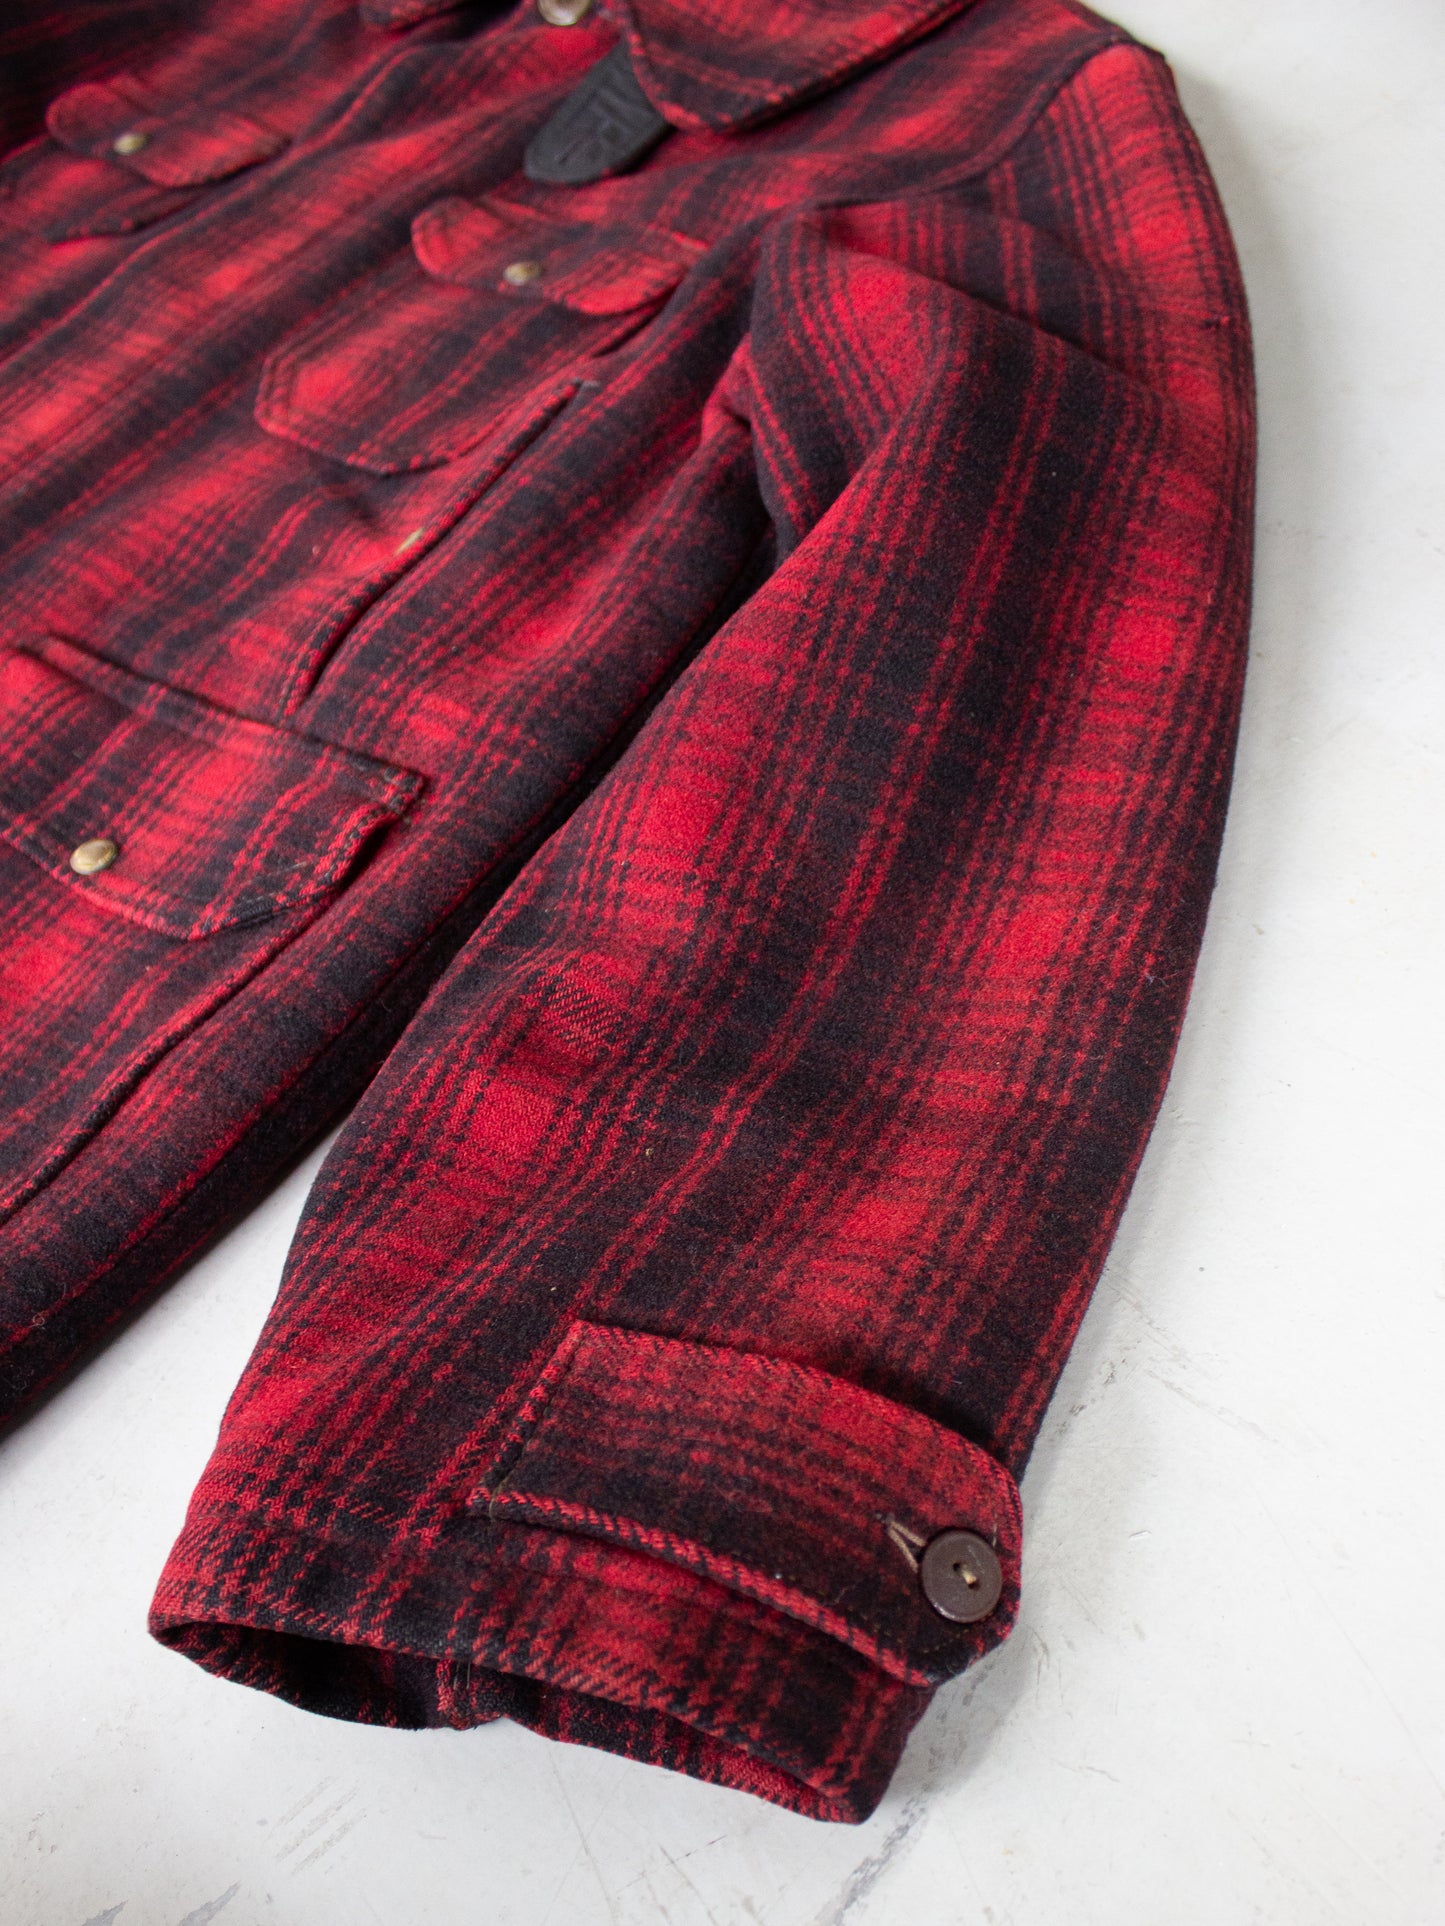 1950's Woolrich Red Buffalo Plaid Hunting Jacket Style 503 (X Large)